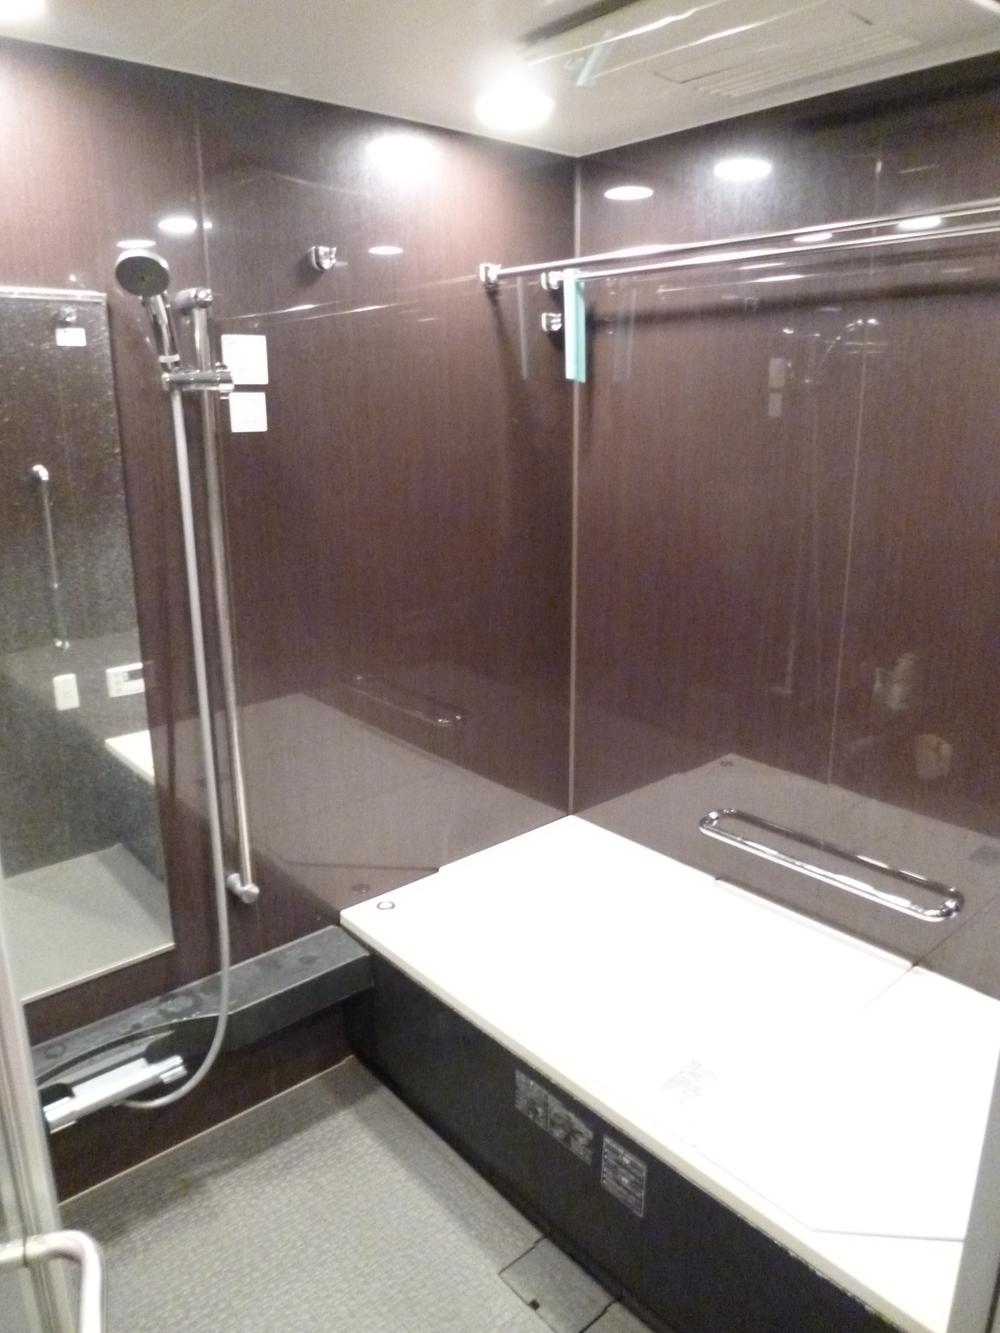 Bathroom. Bathroom dryer with bus. 16 × There are 20 types of room.